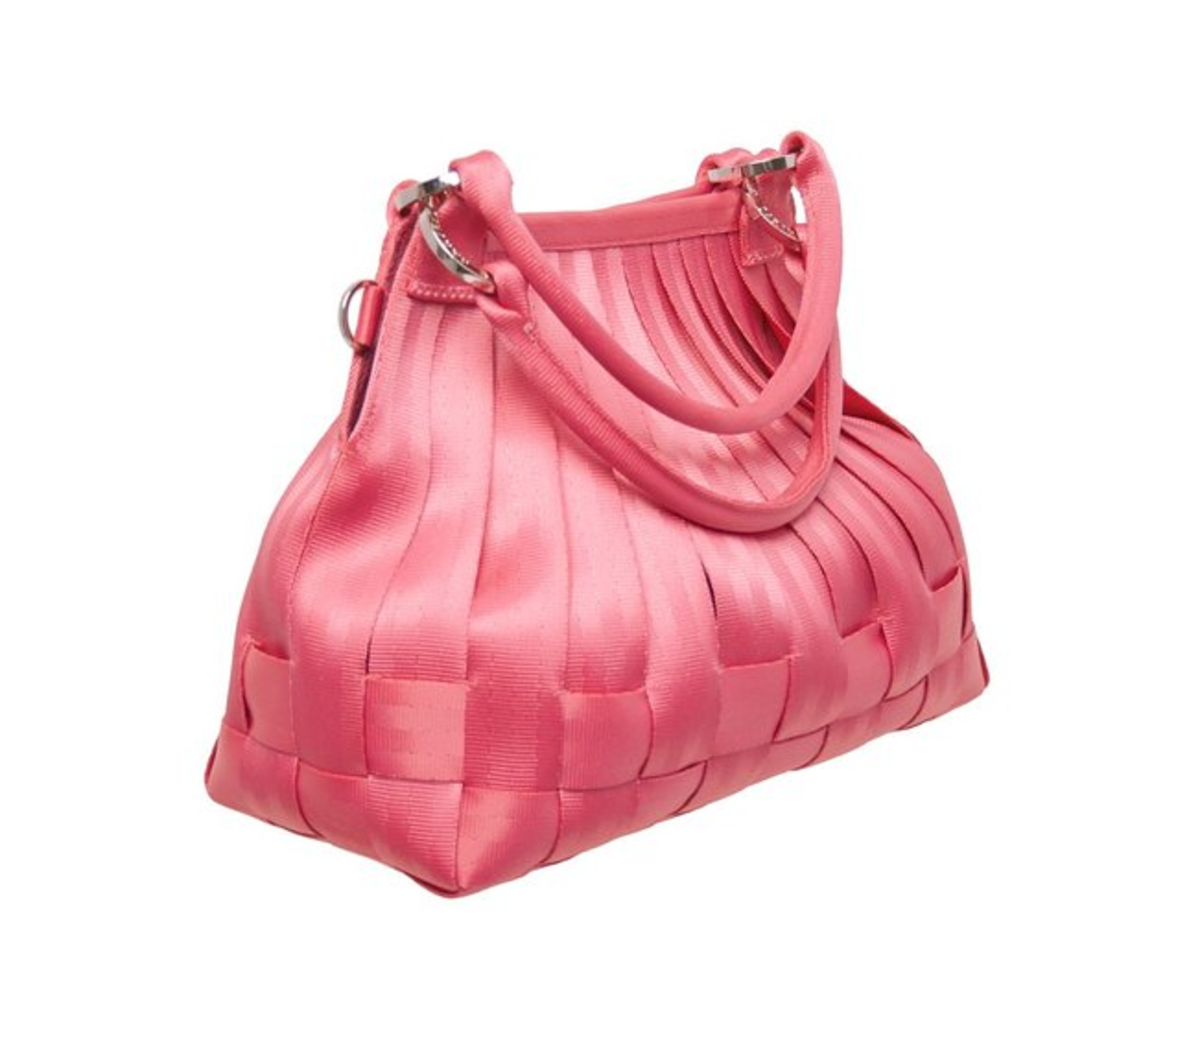 purses-totes-and-handbags-for-the